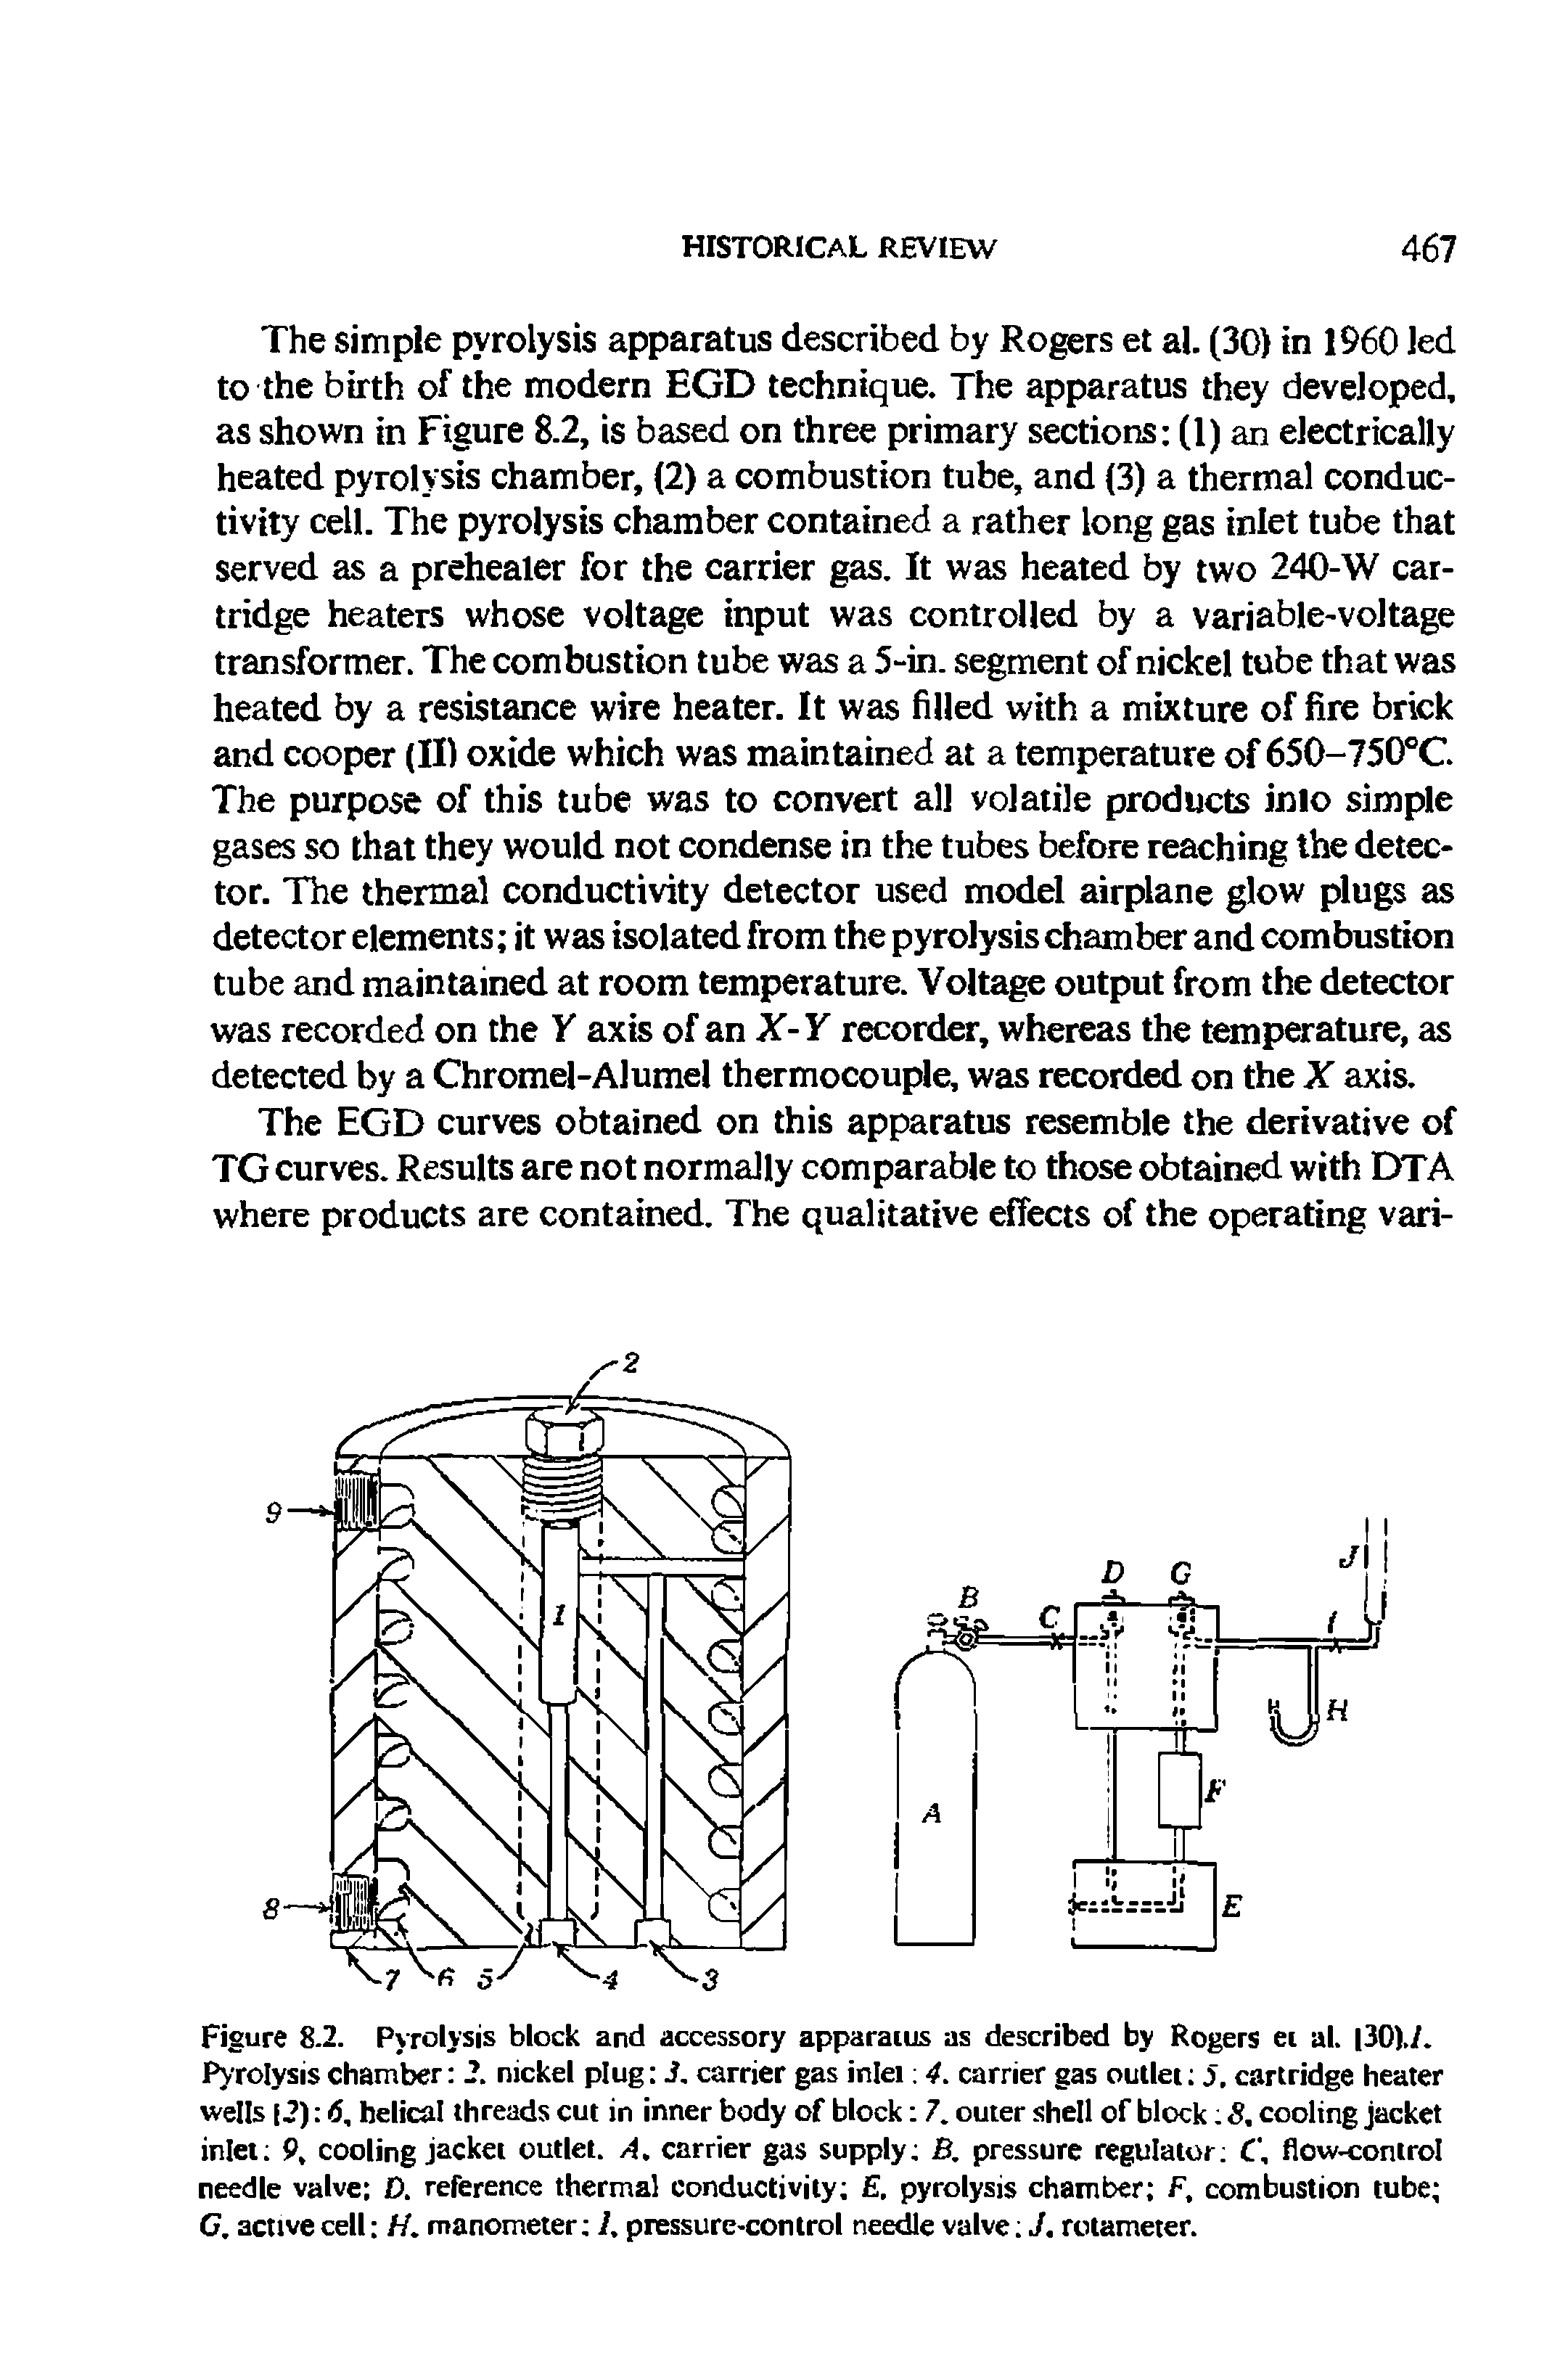 Figure 8.2. Pyrolysis block and accessory apparatus as described by Rogers et al. 30)./. Pyrolysis chamber 2. nickel plug J. carrier gas inlet 4. carrier gas outlet 5. cartridge heater wells 12) 6, helical threads cut in inner body of block 7. outer shell of block 8, cooling jacket inlet 9, cooling jacket outlet. A. carrier gas supply B. pressure regulator C, flow-control needle valve D. reference thermal conductivity E. pyrolysis chamber F, combustion tube C. active cell H. manometer 1, pressure-control needle valve J. rotameter.